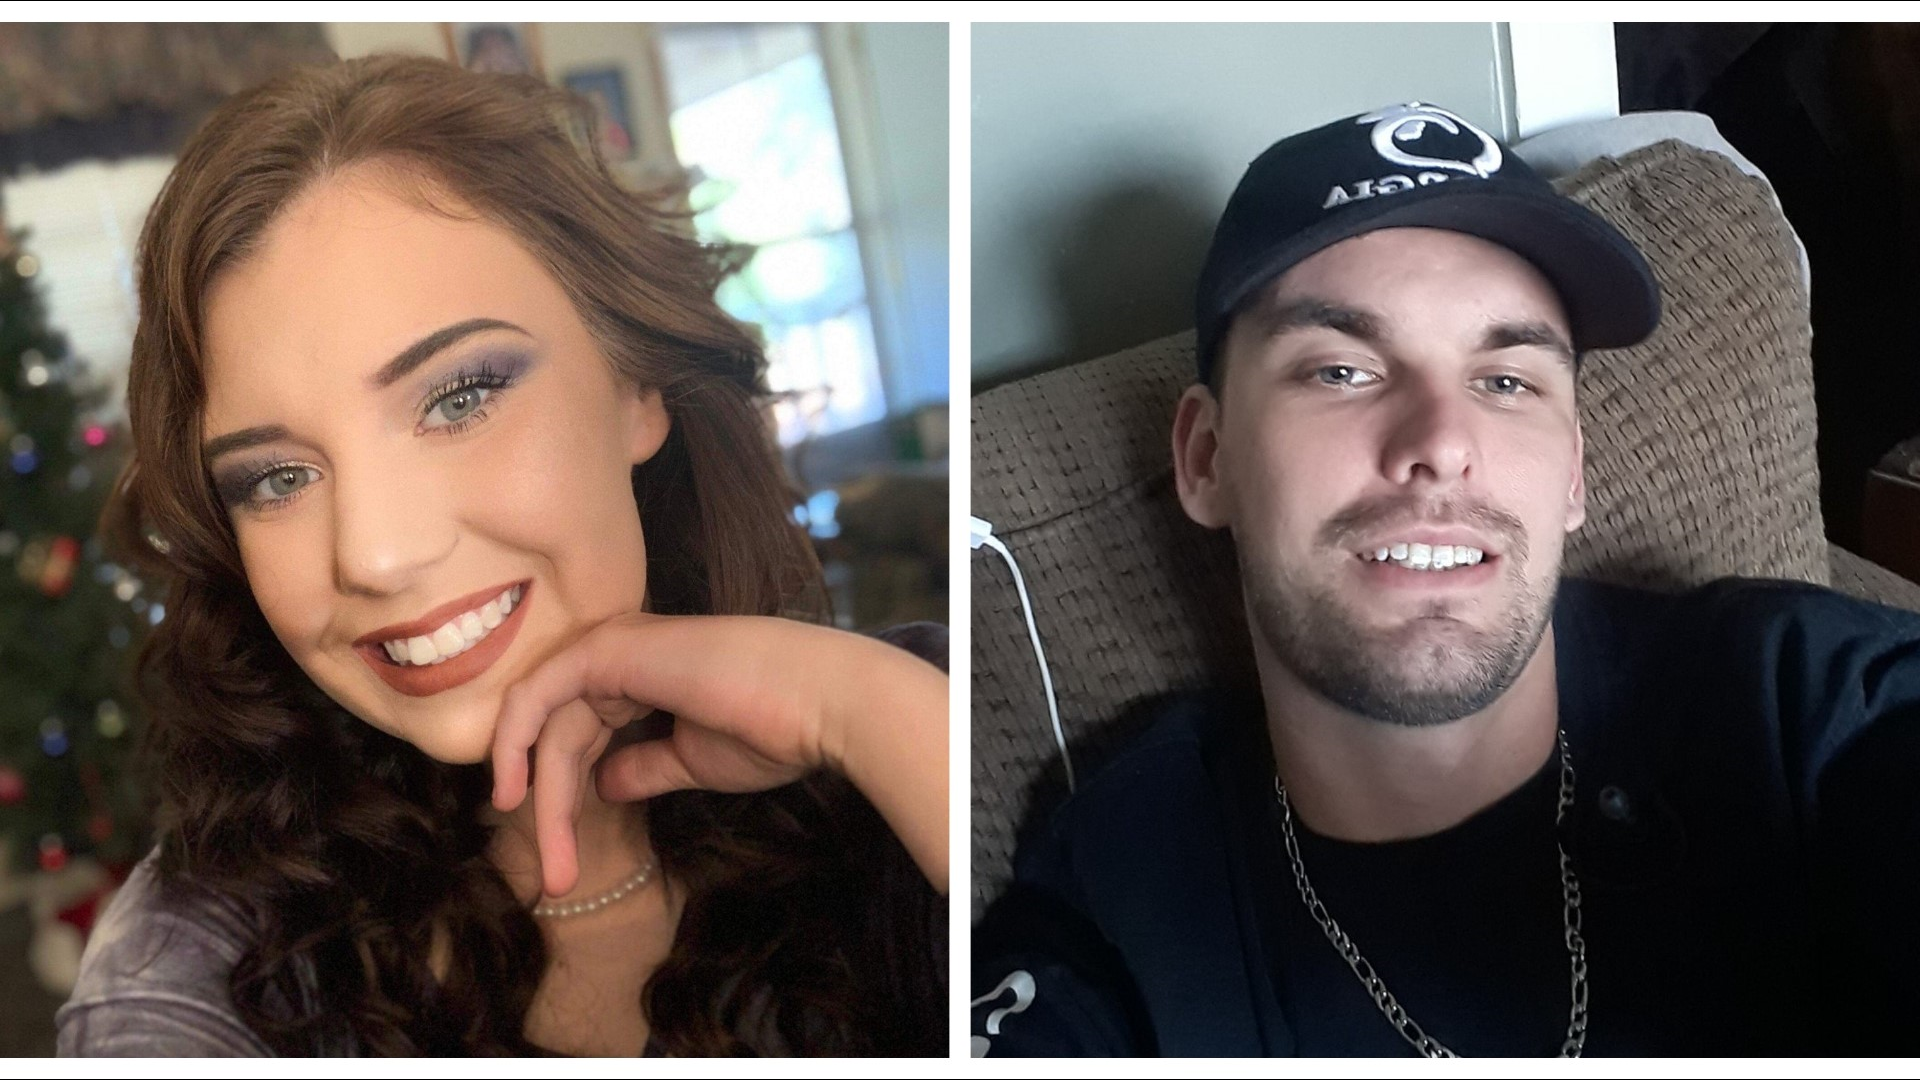 The three are missing after a burned out car was found in Berrien County